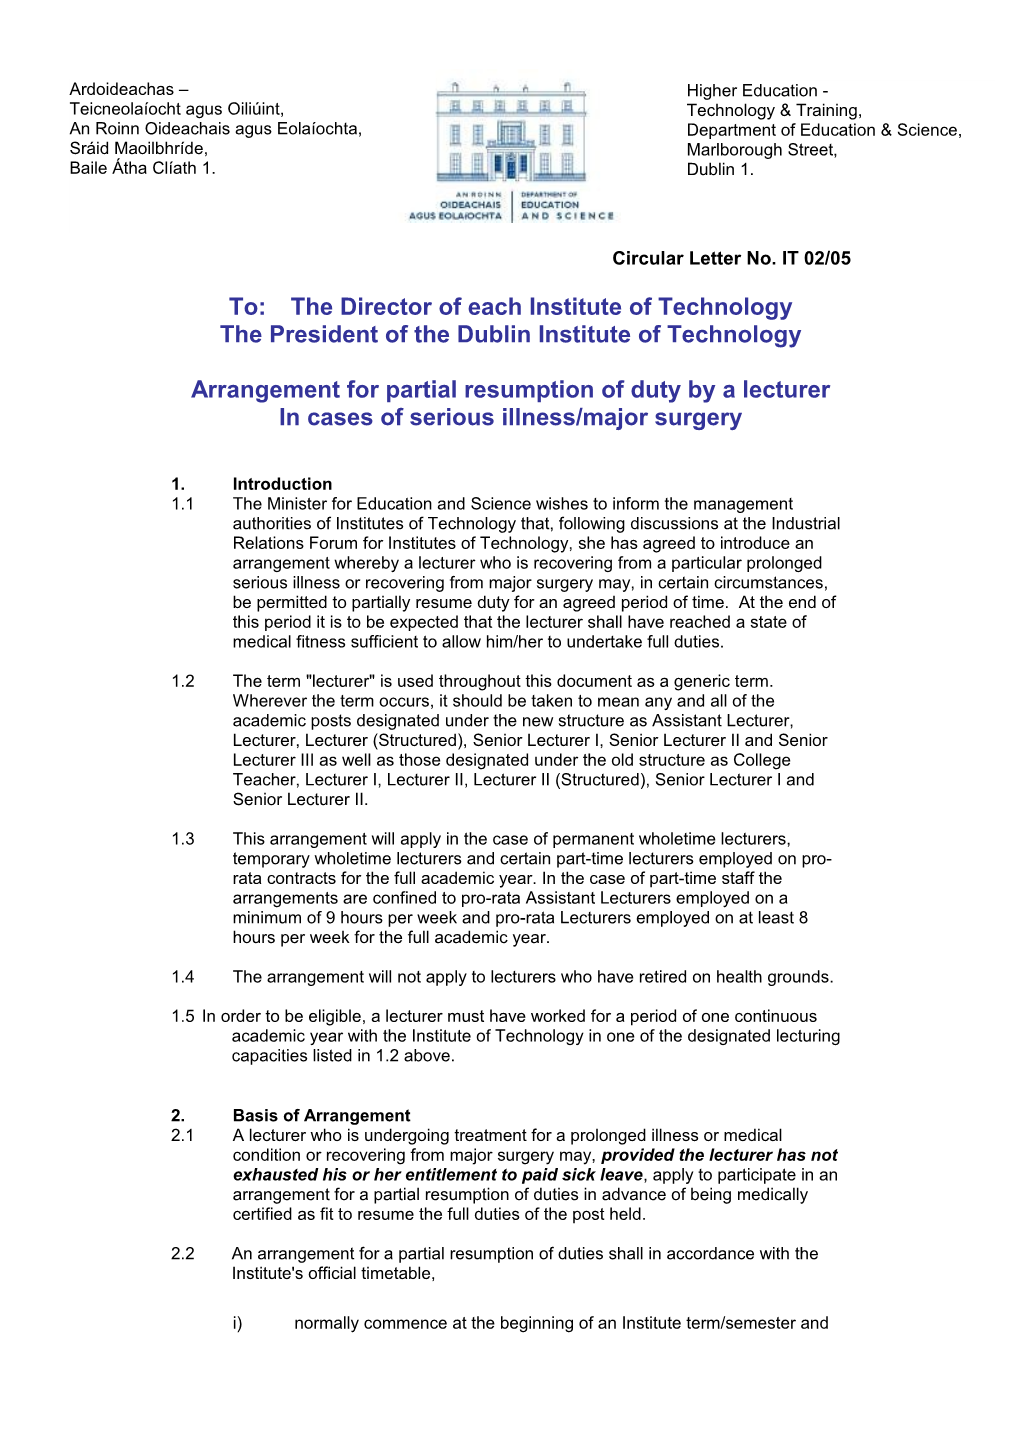 Circular IT 02/05 - Arrangement for Partial Resumption of Duty by a Lecturer in Cases Of